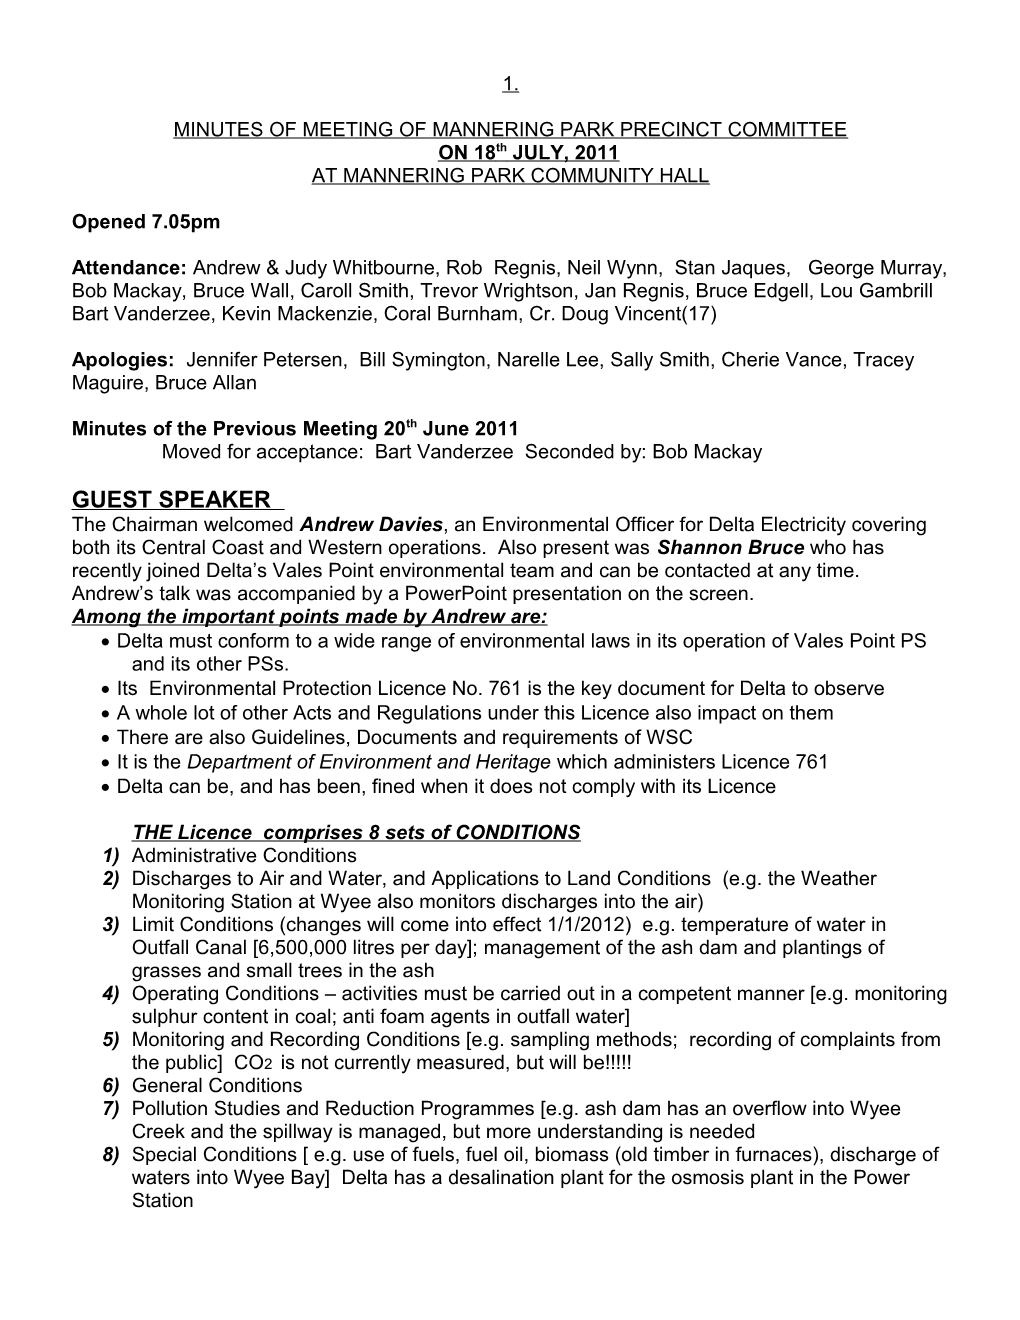 MINUTES of MEETING of MANNERING PARK PRECINCT COMMITTEE on 18Th JULY, 2011